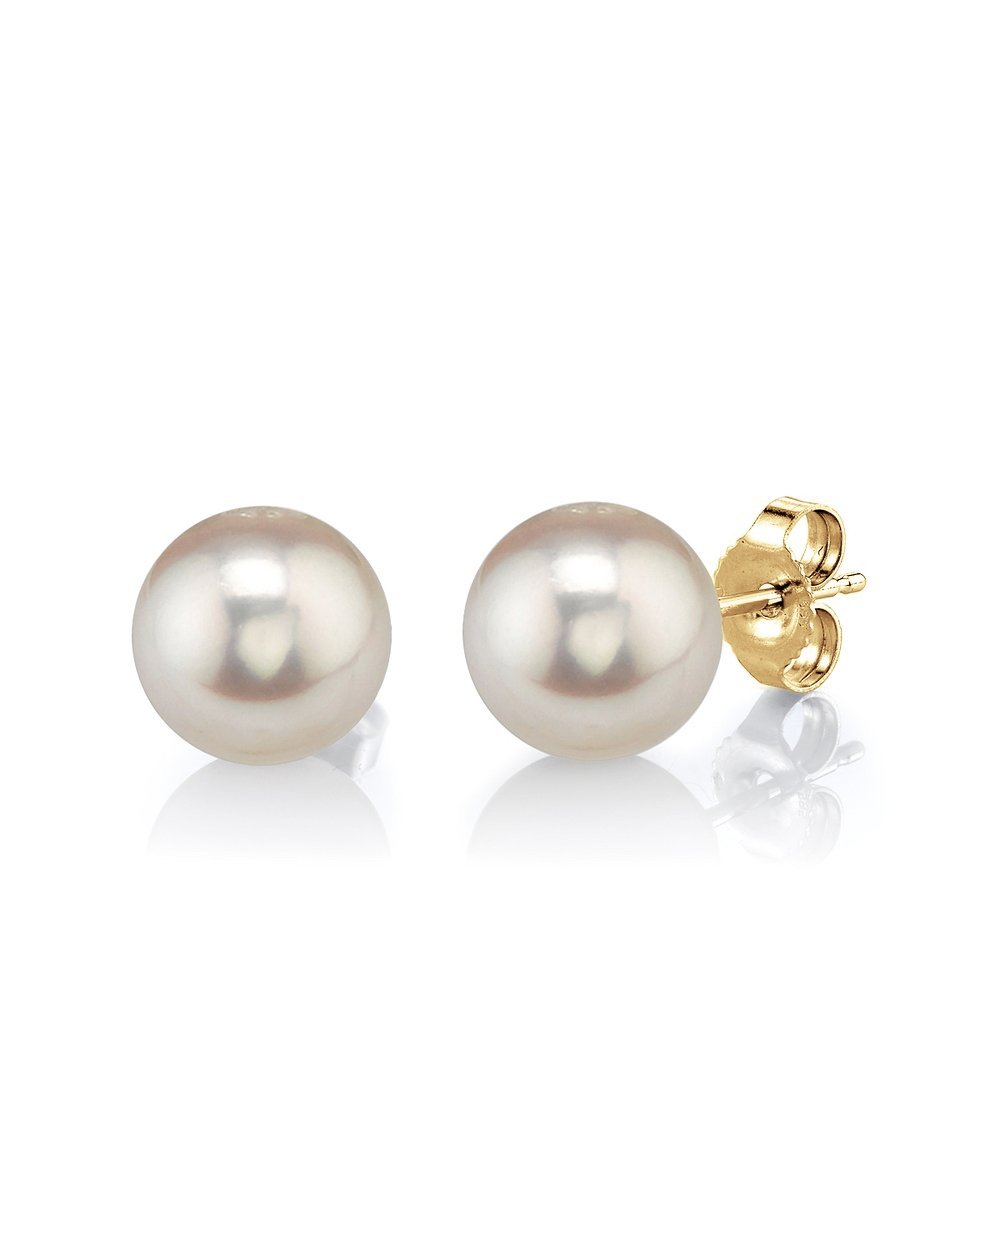 7mm White Freshwater Round Pearl Stud Earrings - Third Image